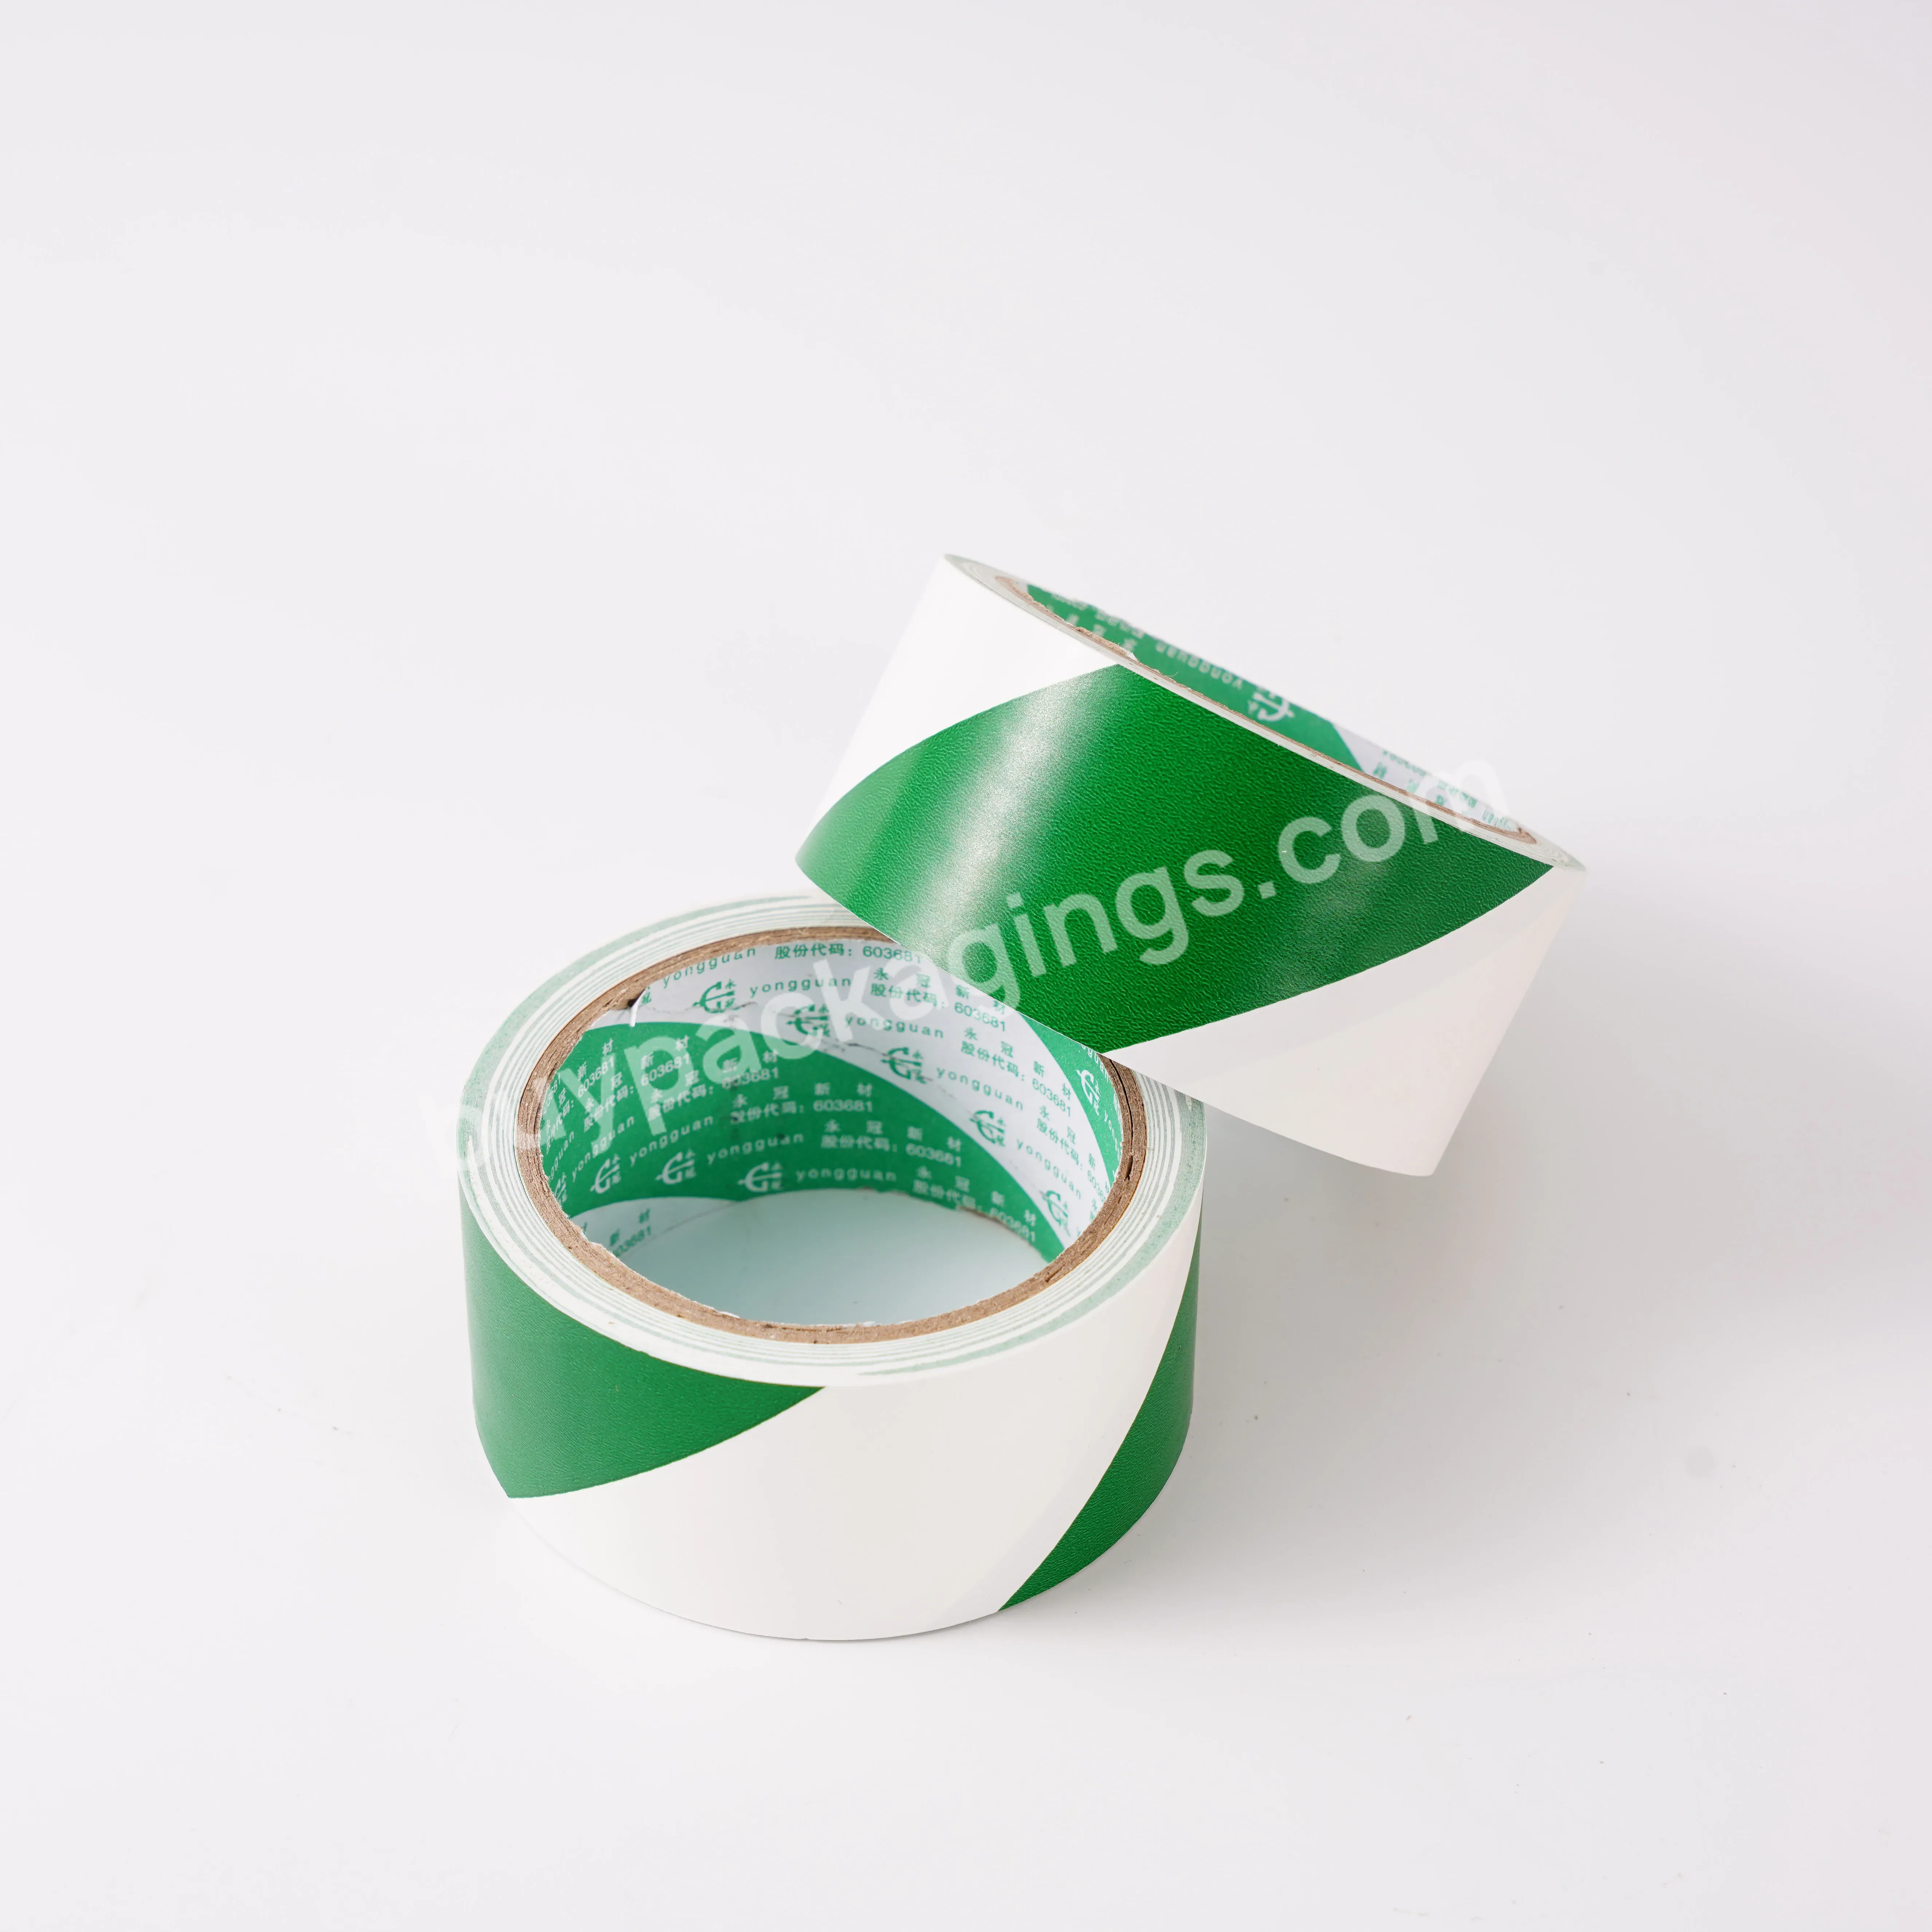 Warning Tape Are Pasted With Waterproof And Wear-resistant Floor Tape Of Workshop - Buy 18m Warning Tape,Waterproof Coloured Adhesive Tape,Coloured Marking Tape.